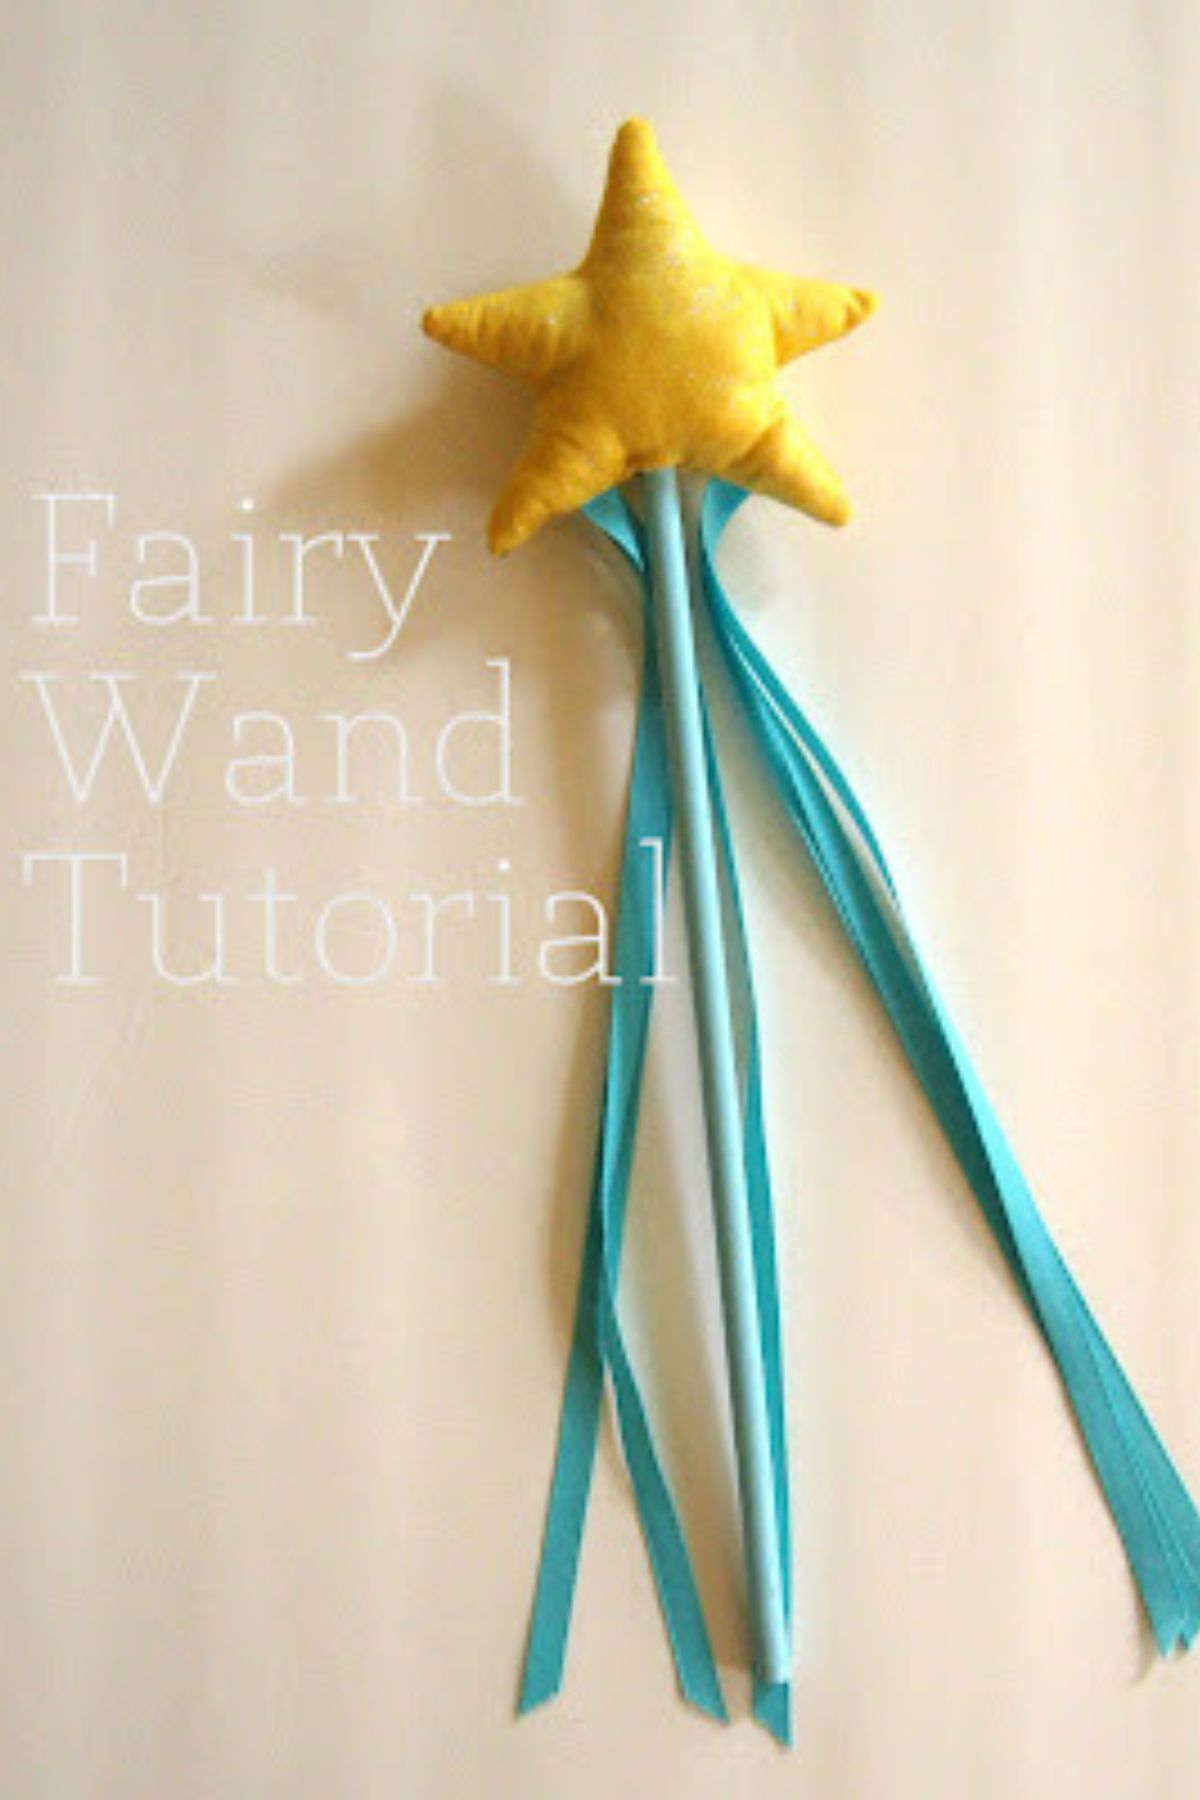 Star fairy wand with blue handle and ribbons and yellow star on top.